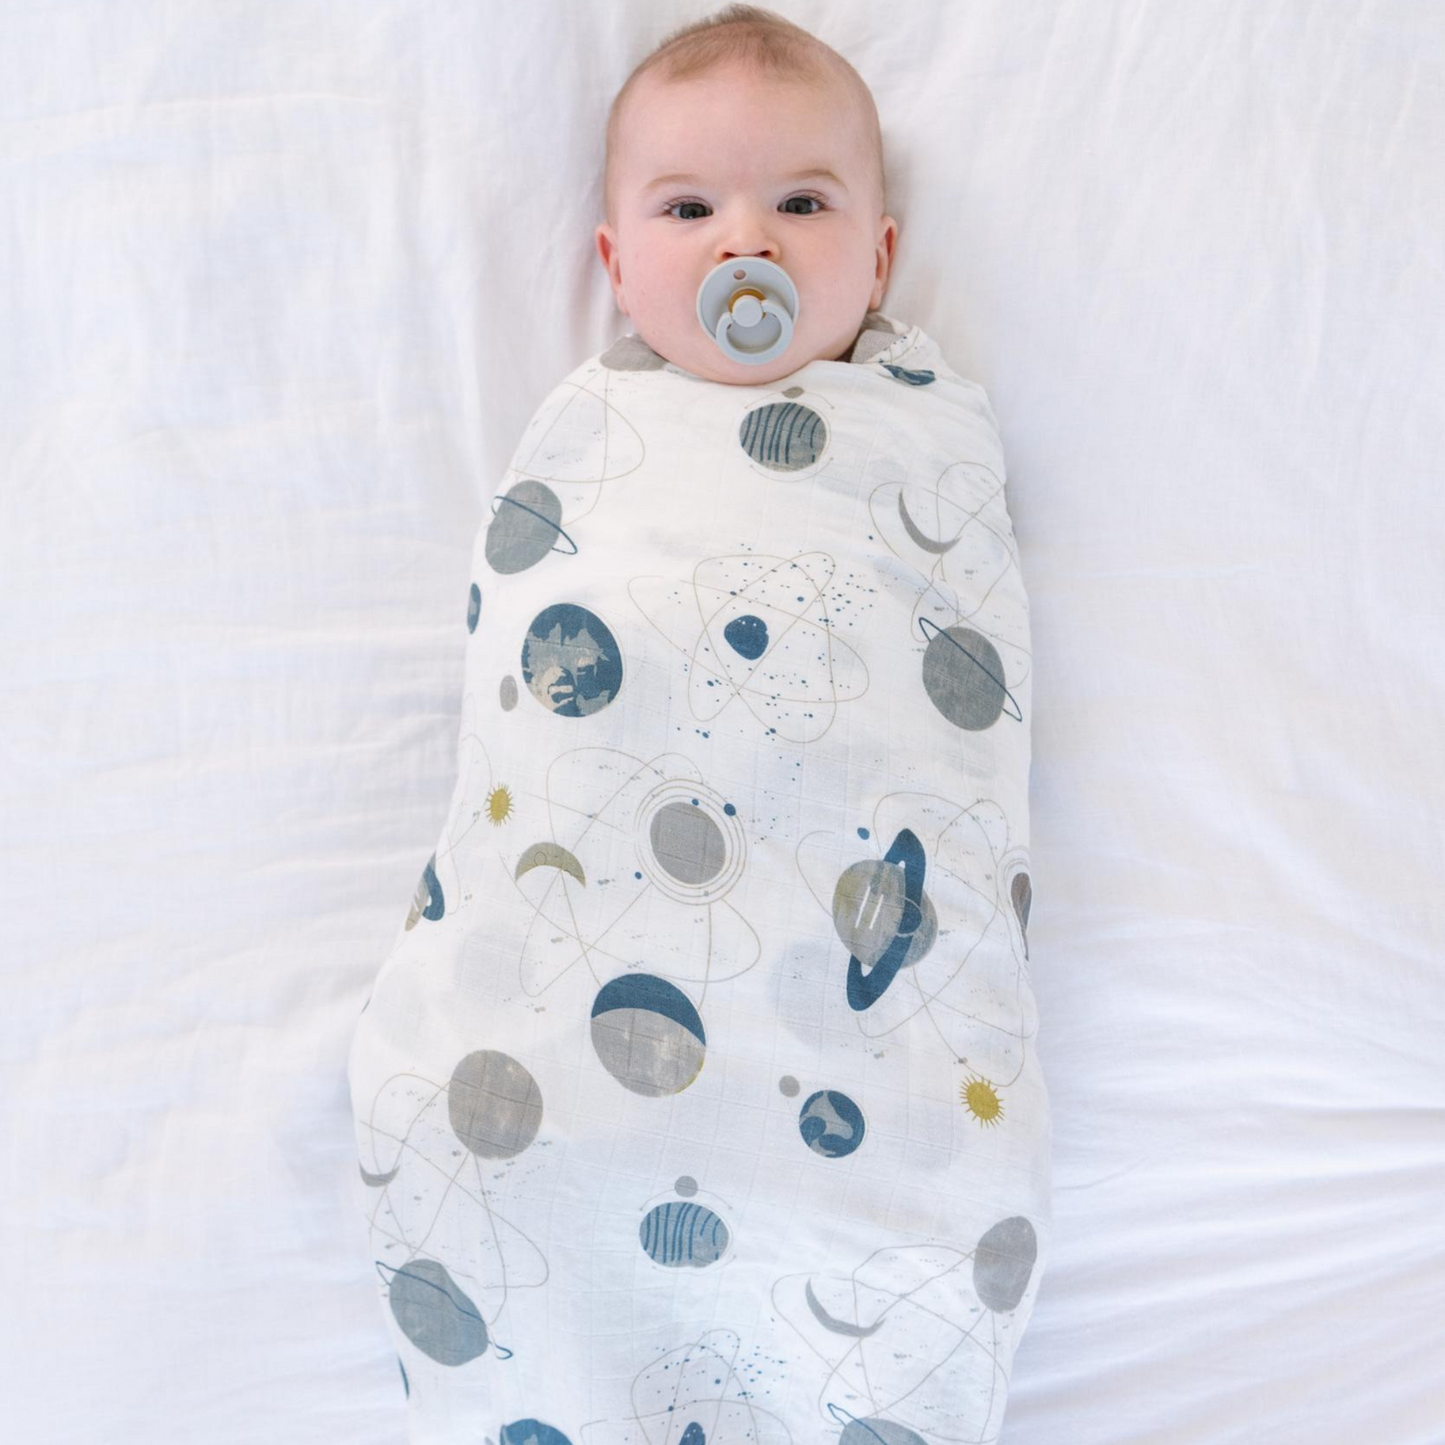 space baby blanket, muslin swaddle, bamboo swaddle, muslin swaddle blanket boy